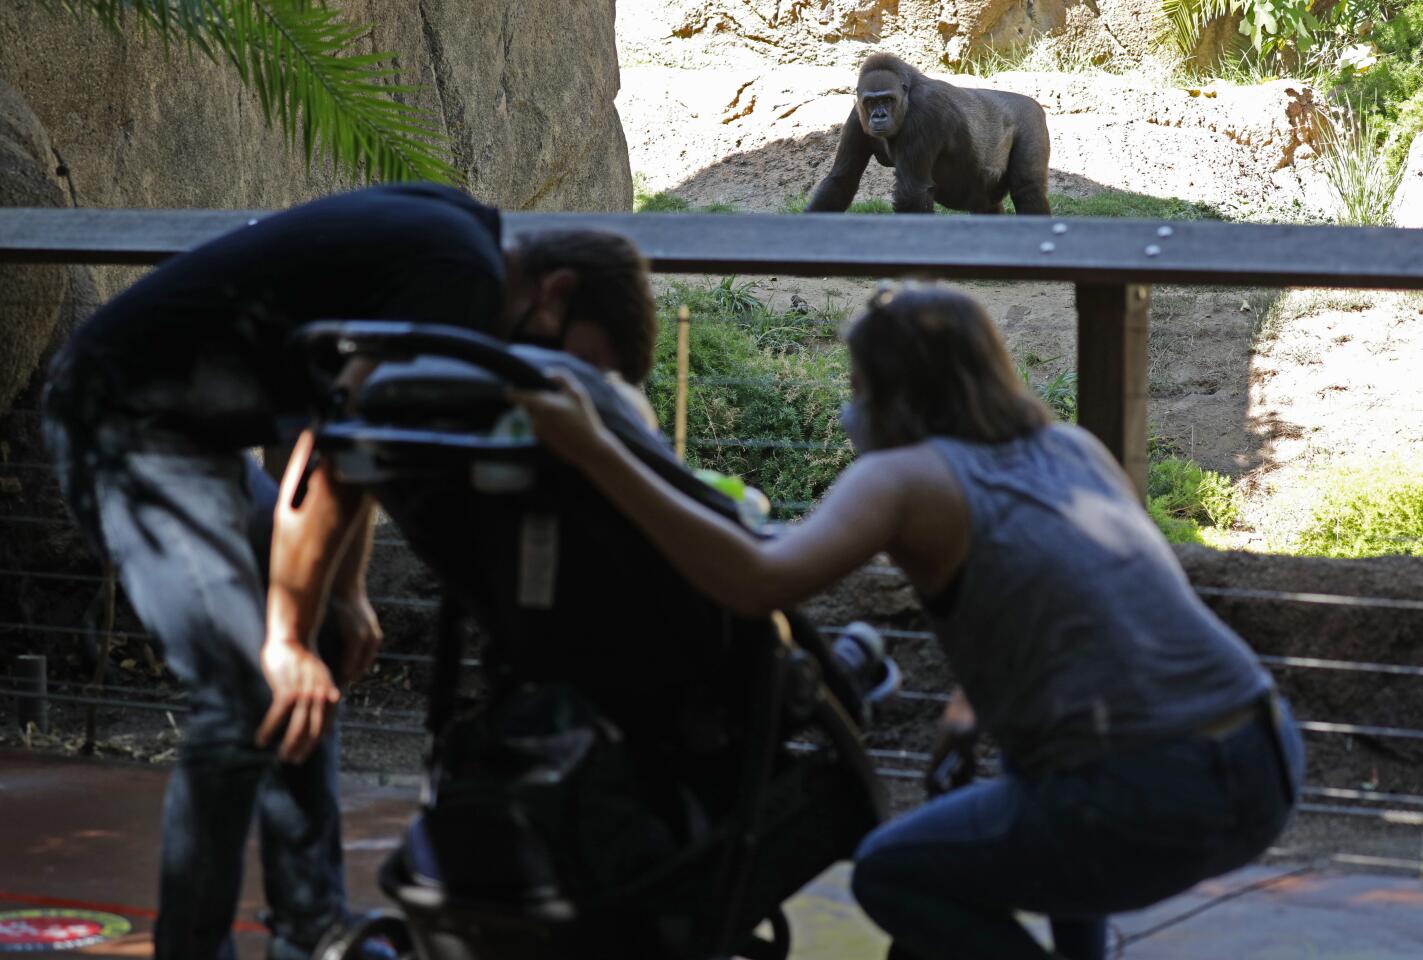 Rapunzel, a Western lowland gorilla, looks out at visitors